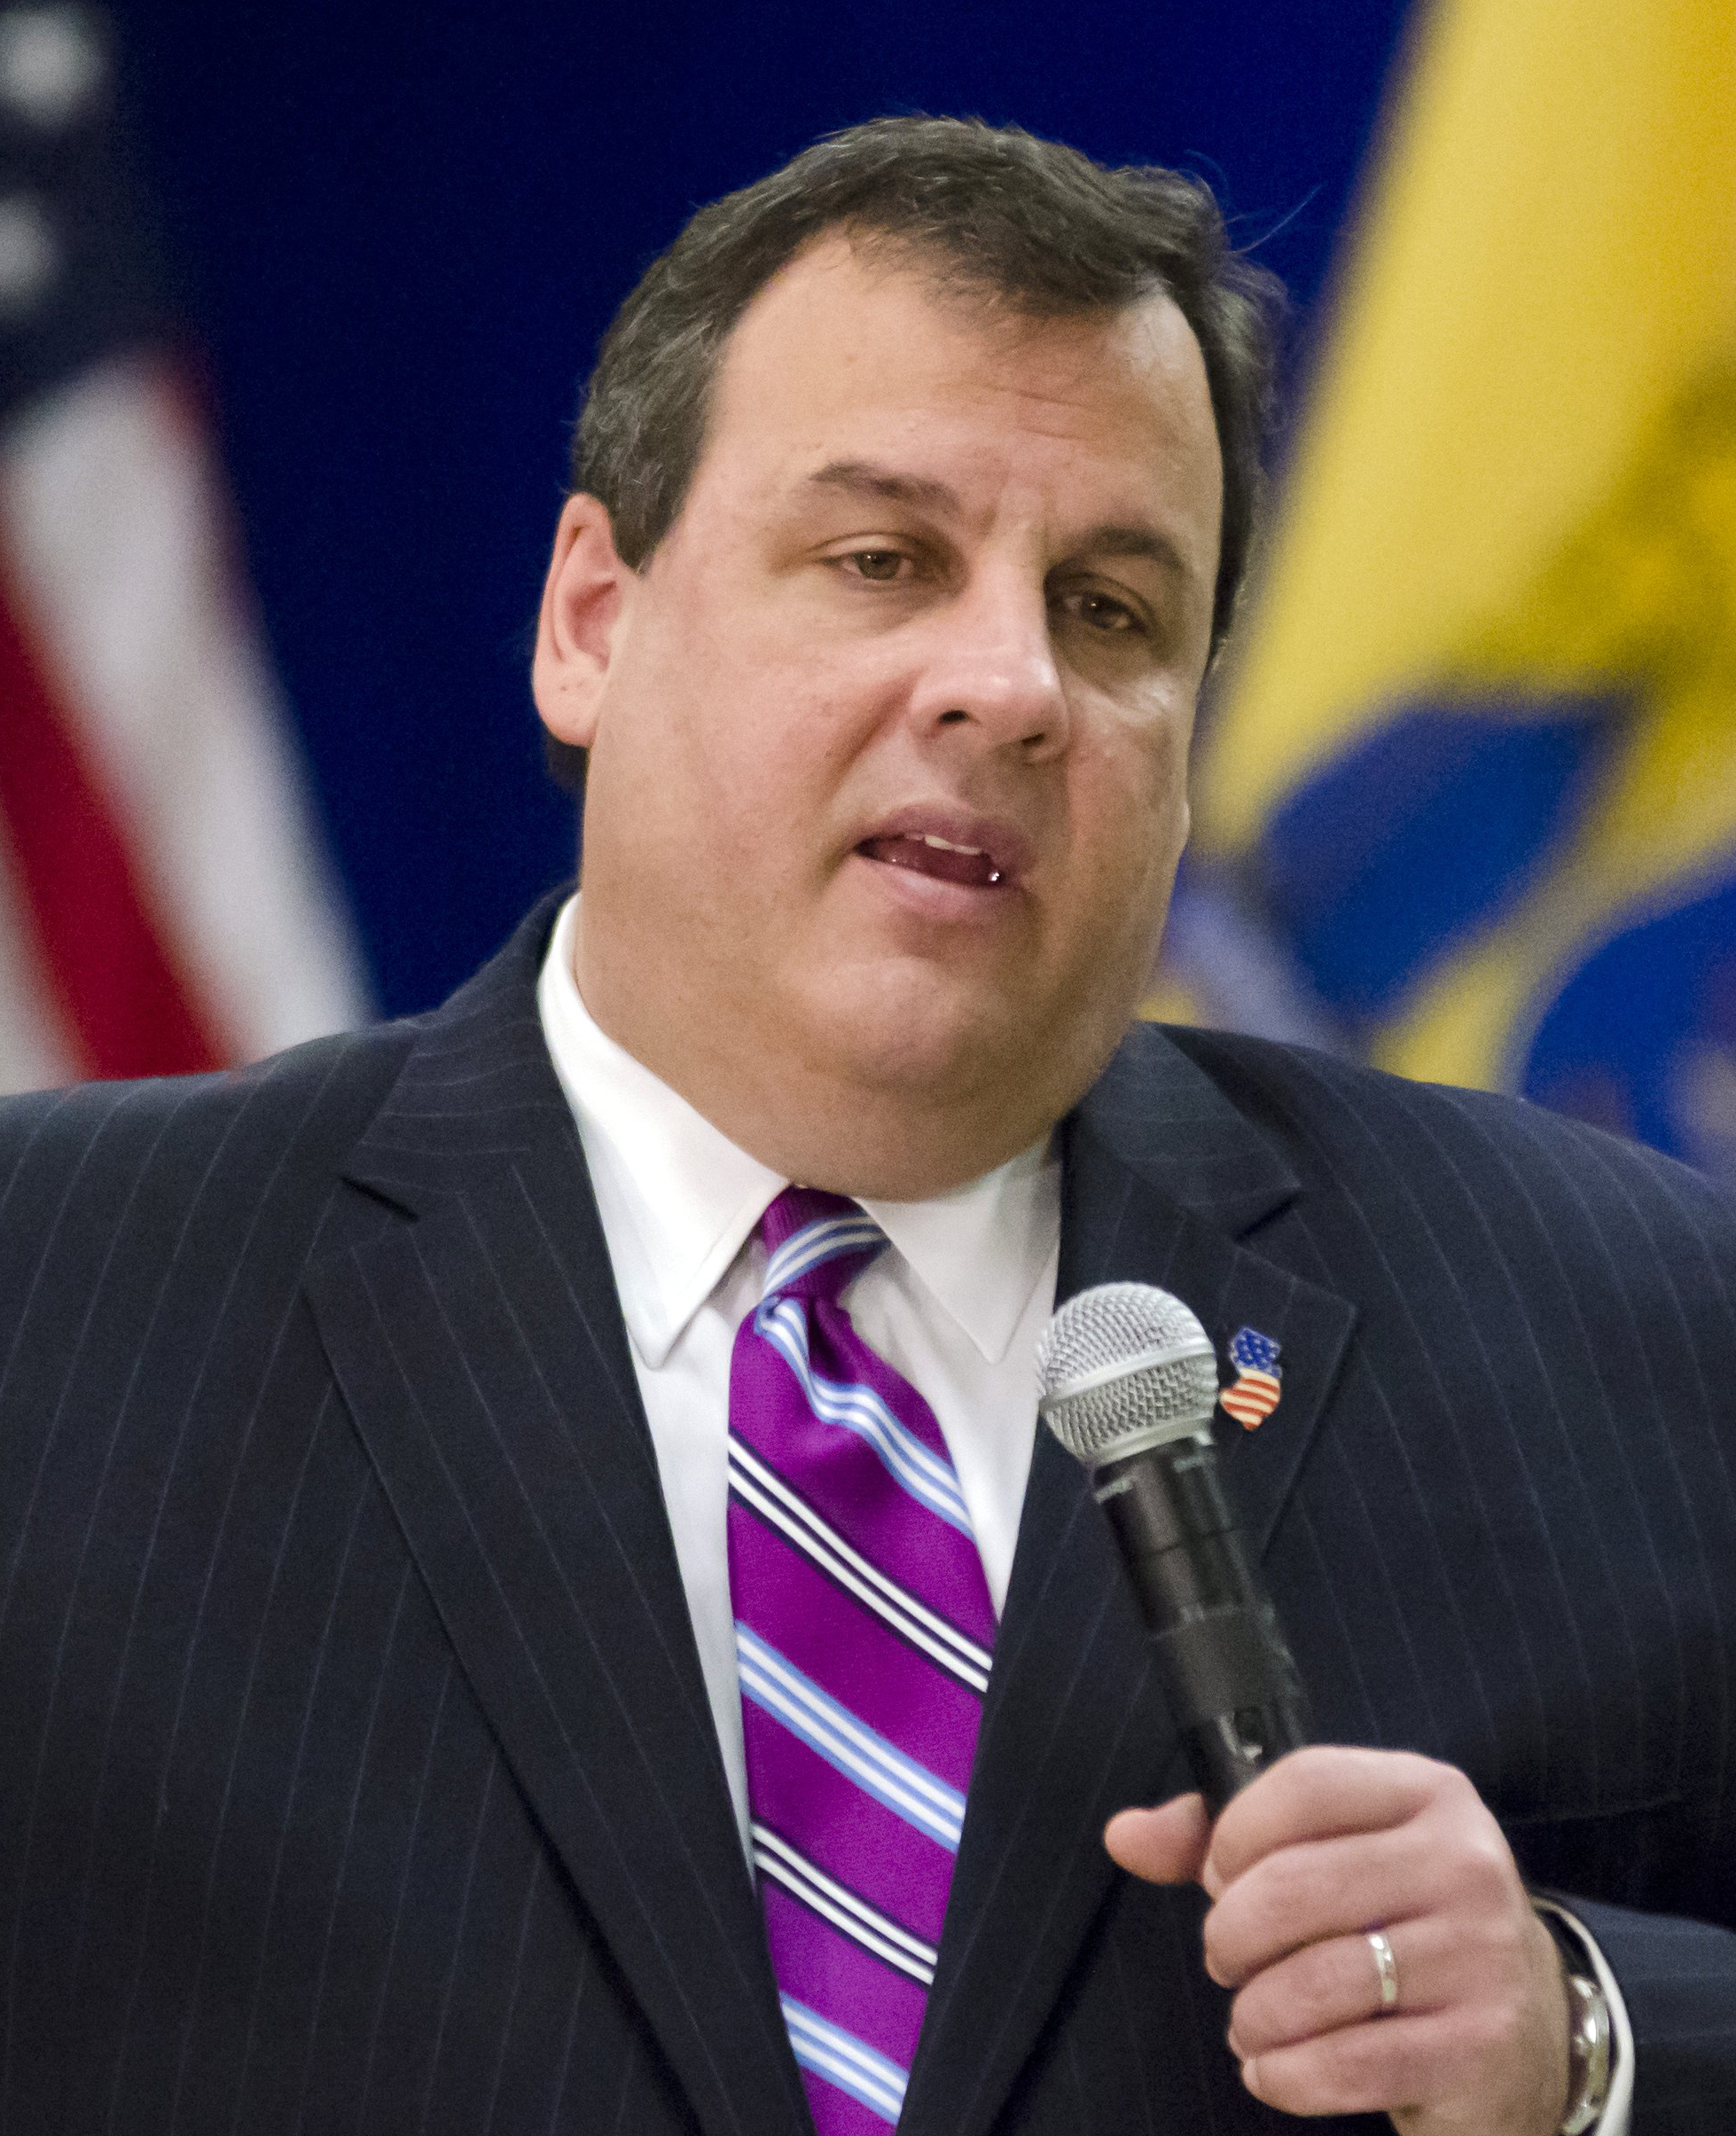 Union Leader: Solutions to New Jersey Pension Woes Are in Christie’s Hands